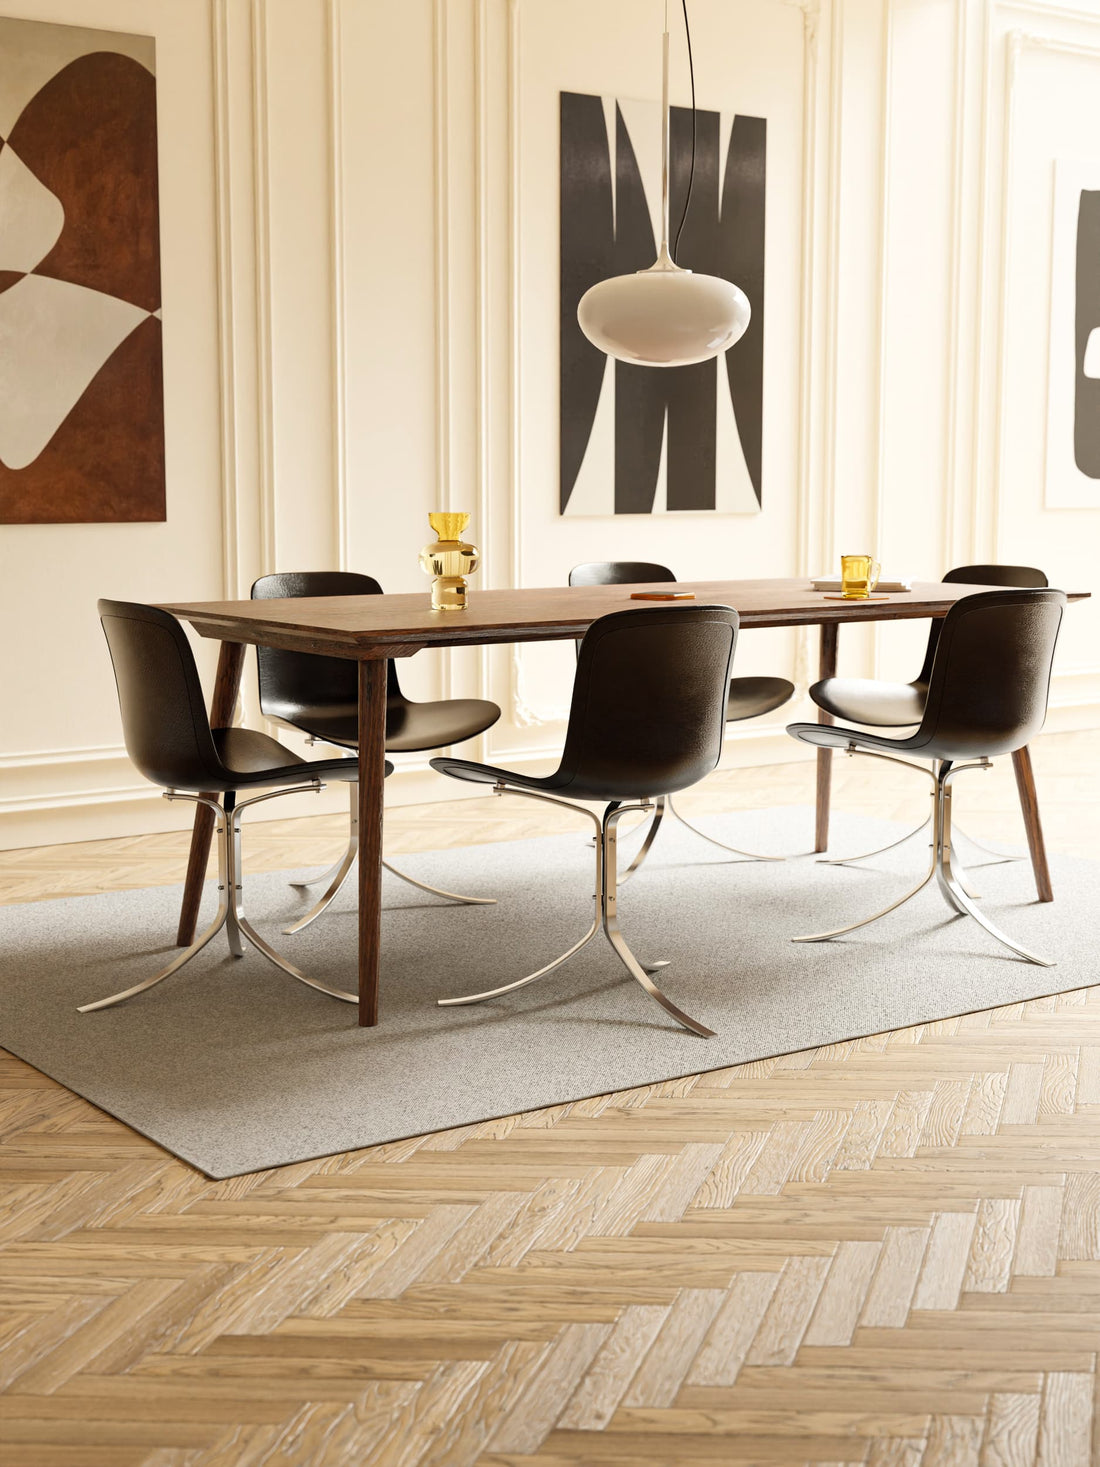 How to find the perfect rug for your dining room